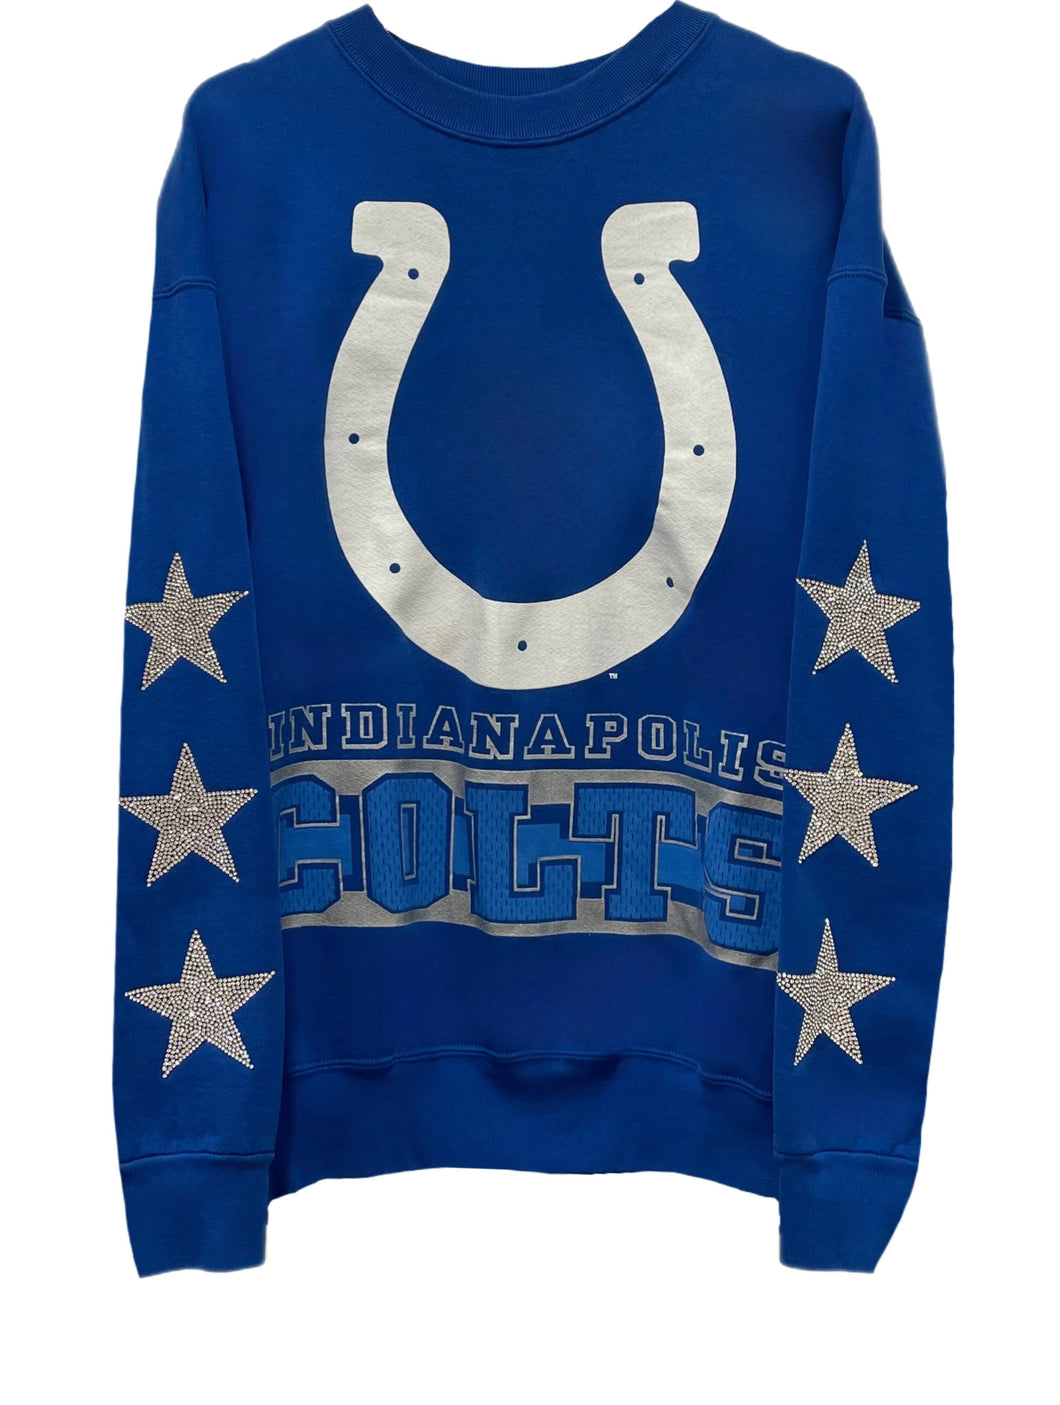 Indianapolis Colts, Football One of a KIND “Rare Find” Vintage Sweatshirt with Three Crystal Star Design